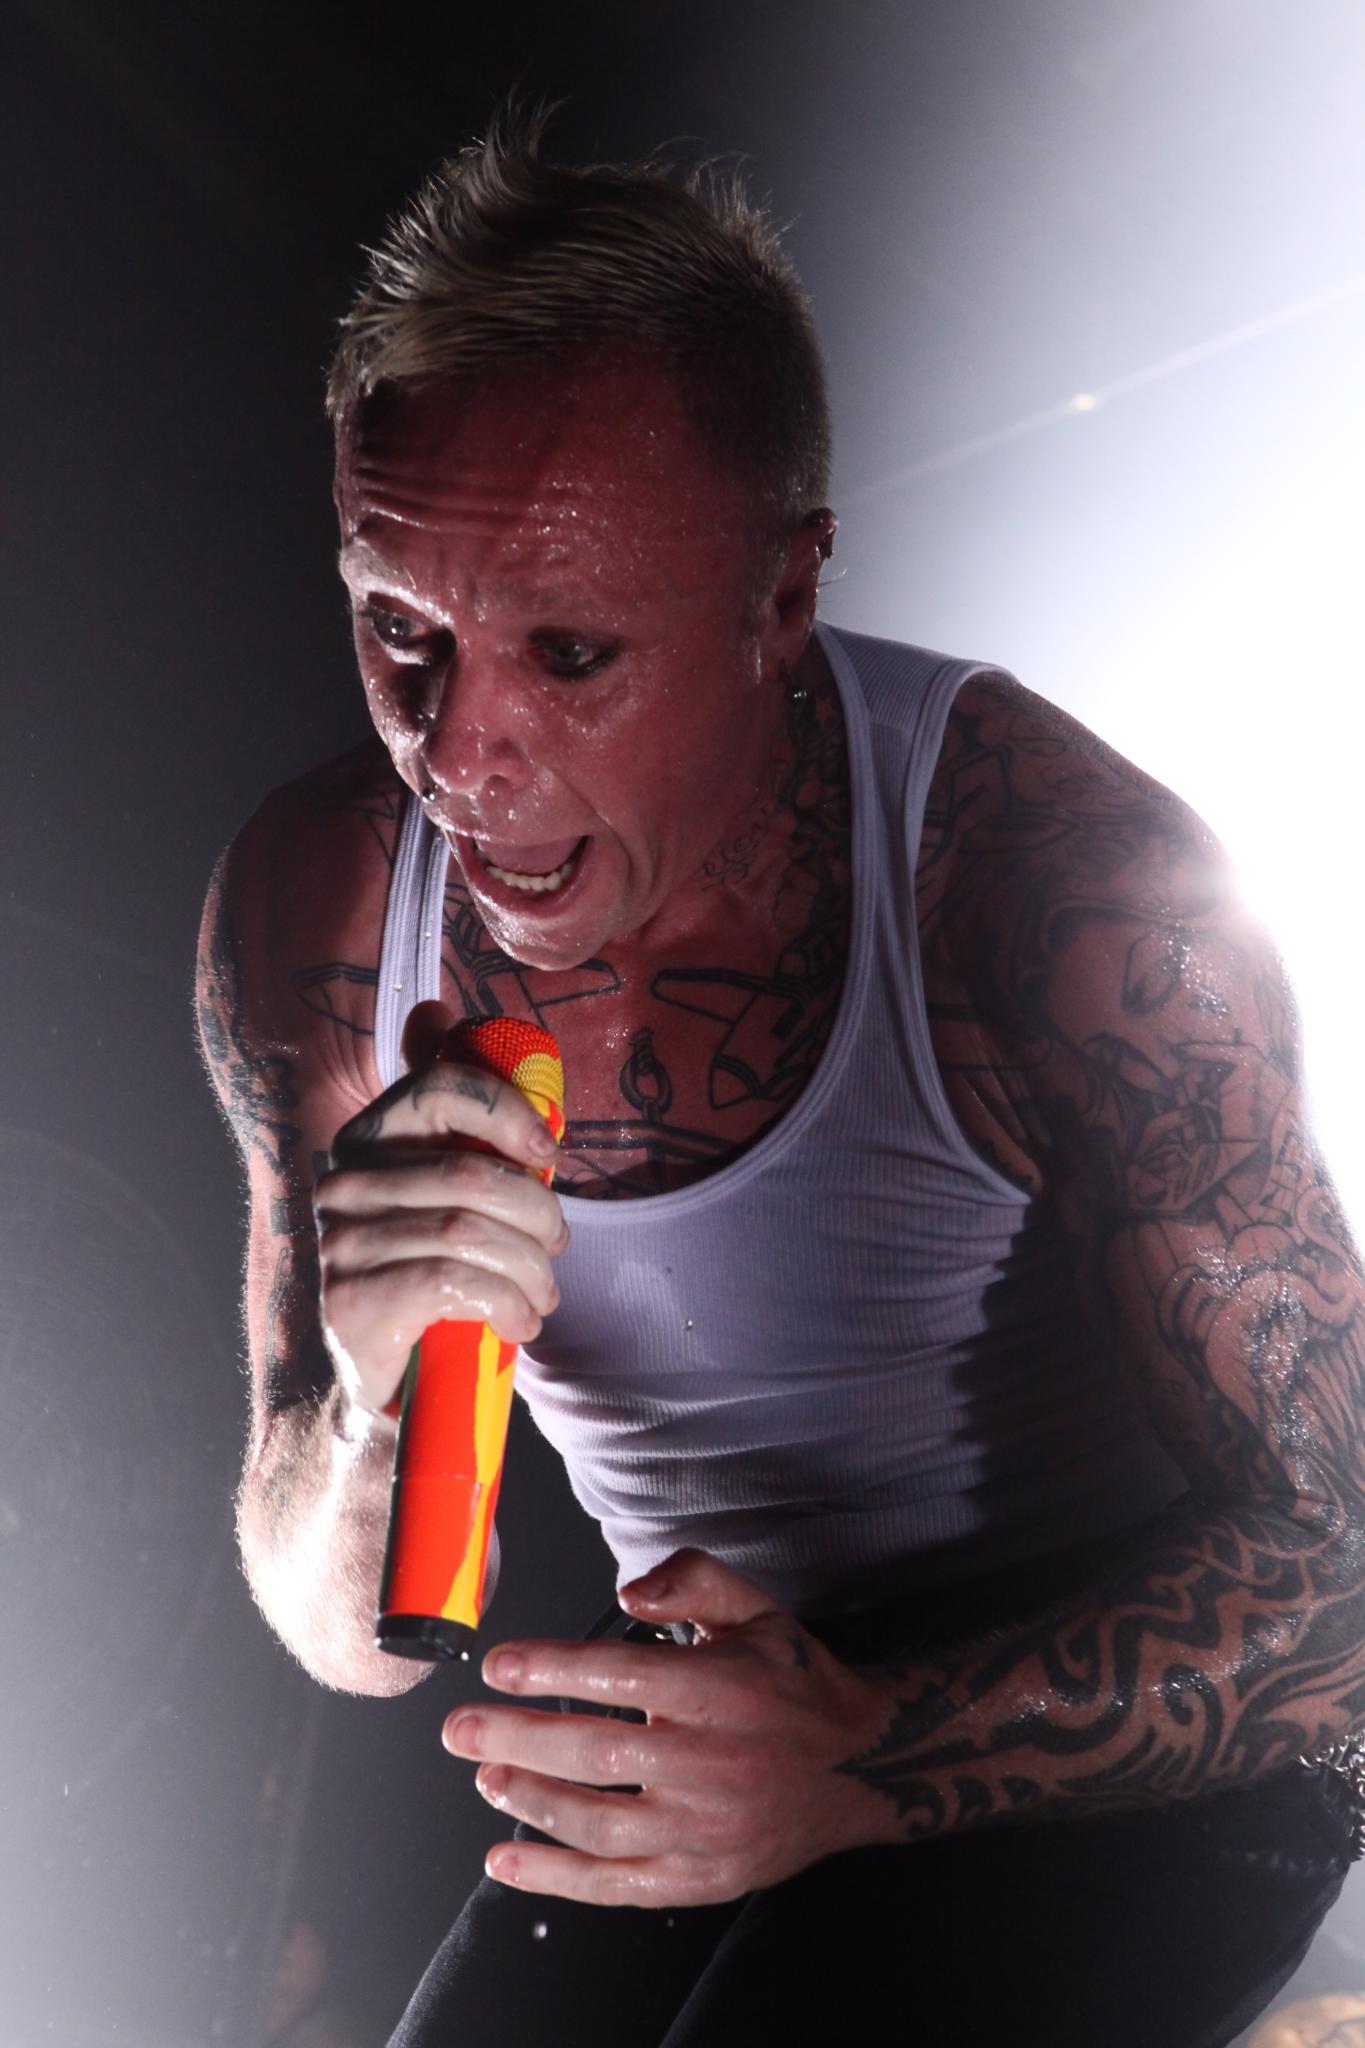 Wikipedia, Flickr images reviewed by FlickreviewR, January 2009 in Melbourne, Keith Flint, Photograp